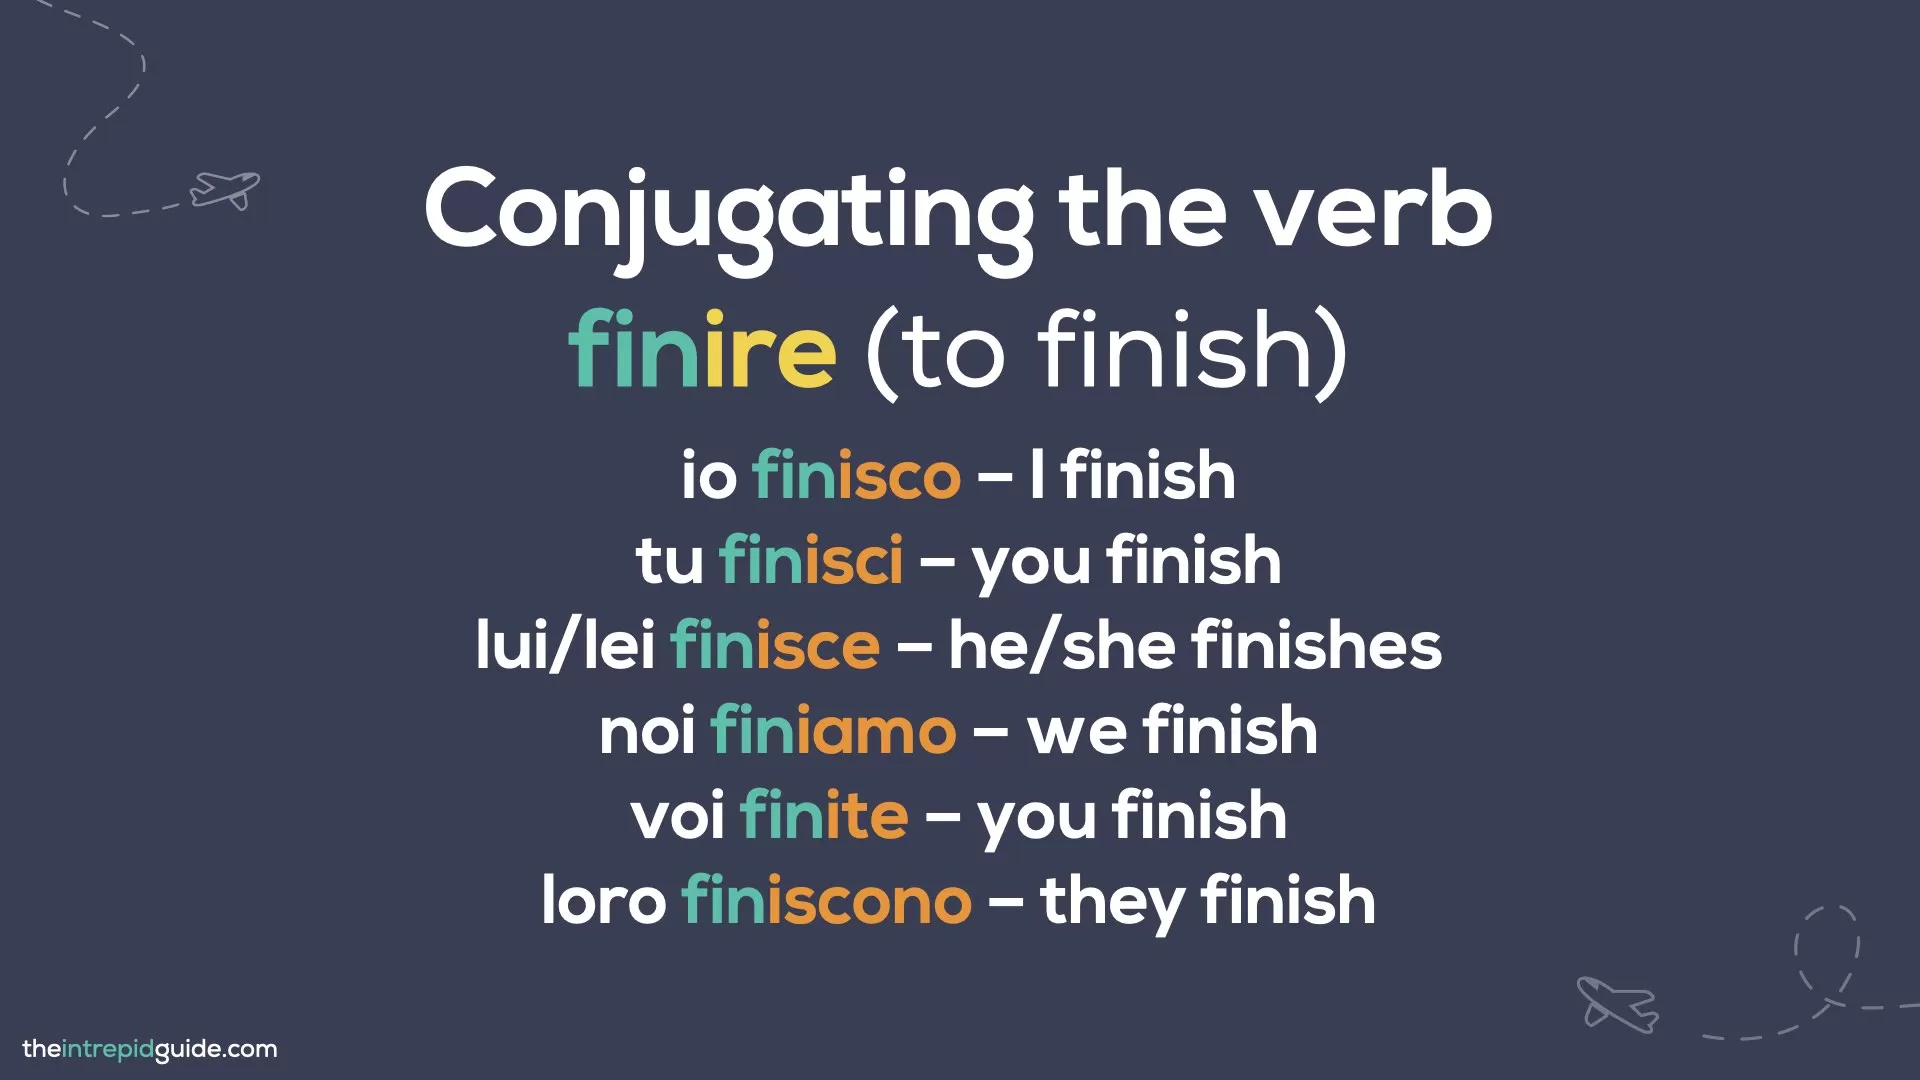 How to Conjugate Italian Verbs - Conjugating the verb finire - to finish